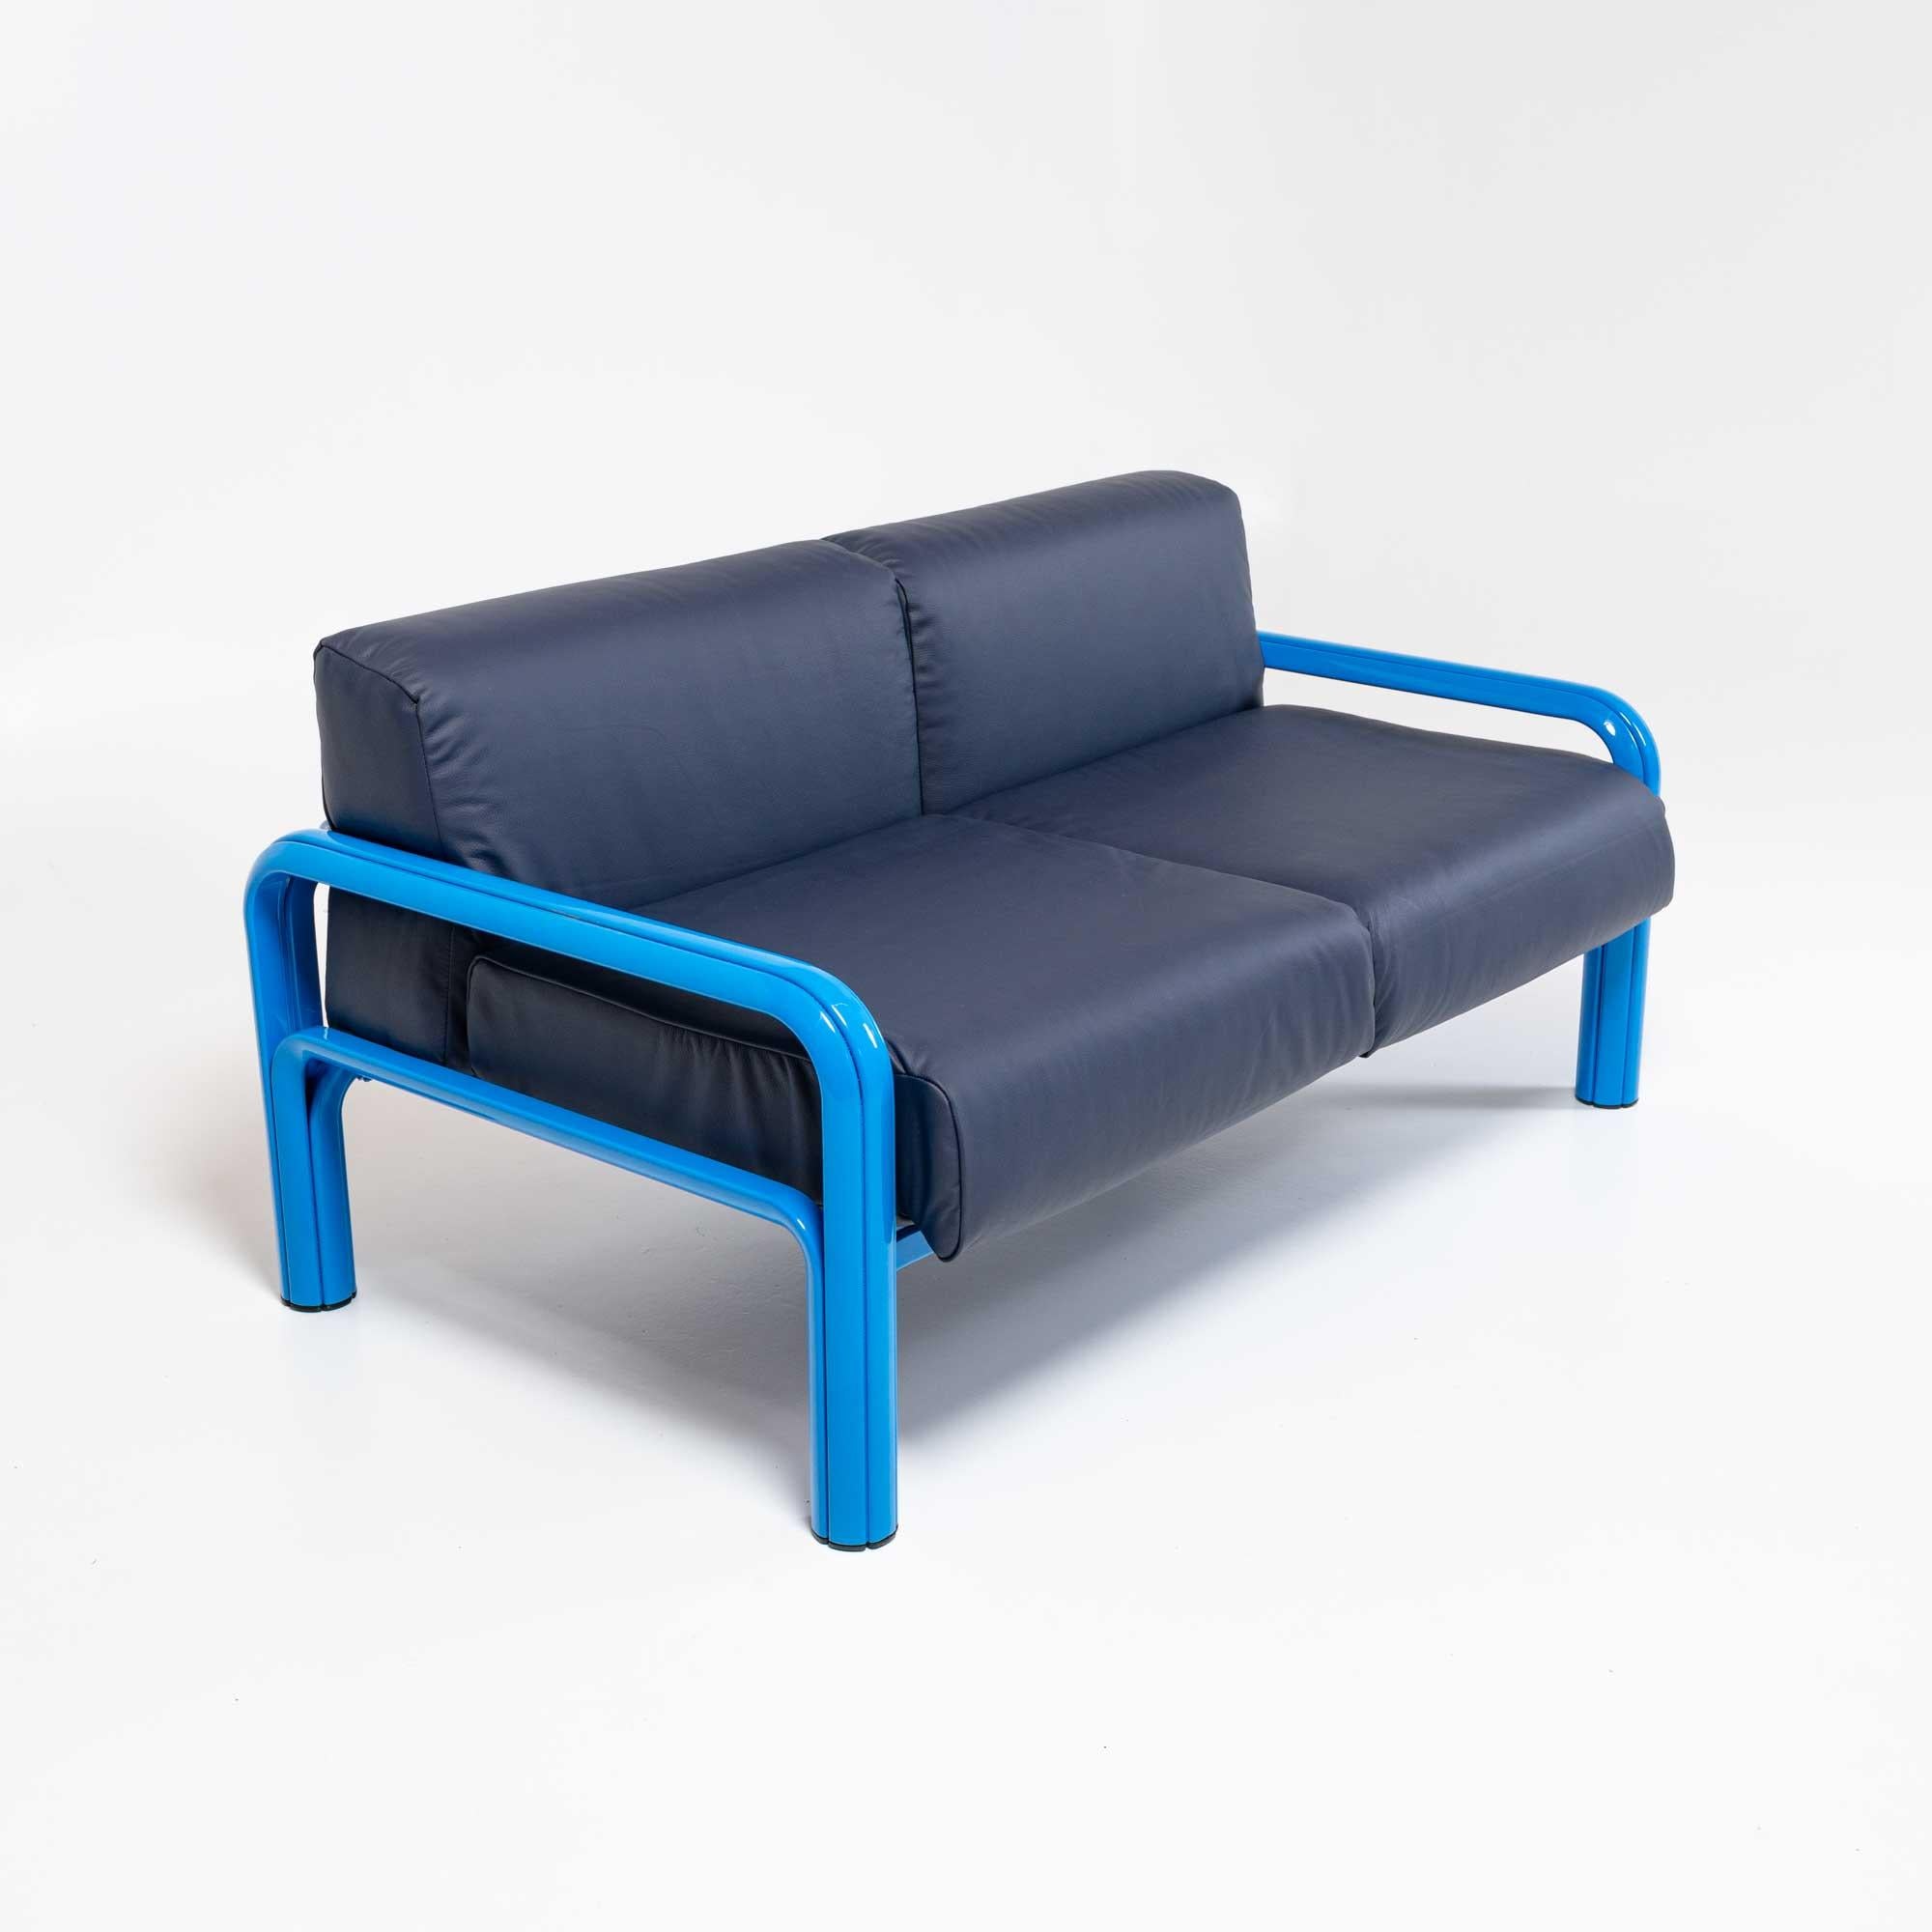 Loveseat from Gae Aulenti’s eponymous 1976 collection for Knoll. Low, horizontal design features a rounded frame of extruded steel in newly powder coated baby blue and dense cushions re-upholstered in Elmo topgrain navy leather.

Dimensions: 60”